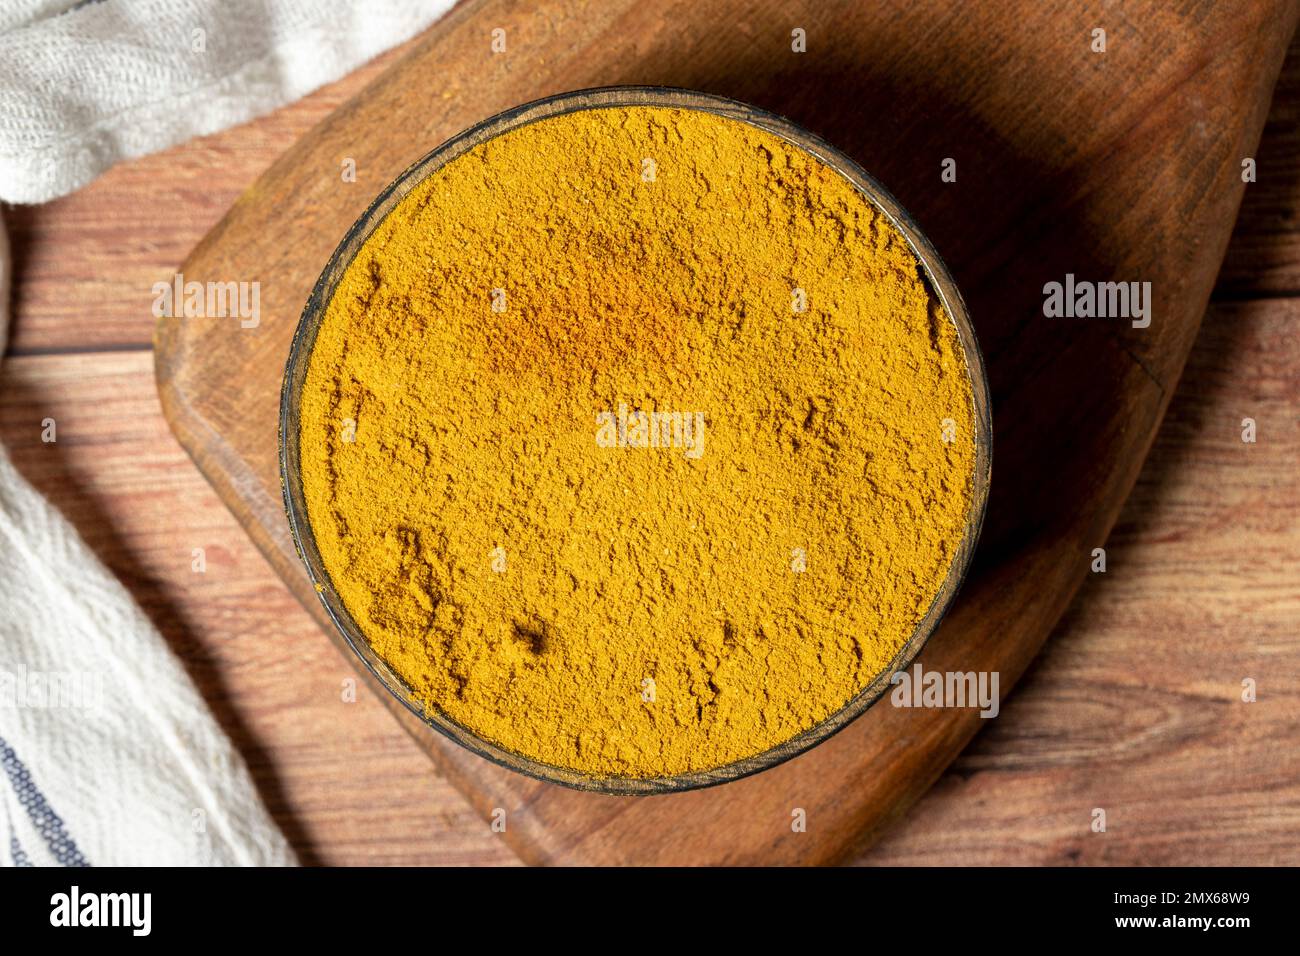 Curry Masala Powder. Turmeric powder or curry powder spice in a bowl on wooden background. İndian spices. Dry spice concept. Top view Stock Photo